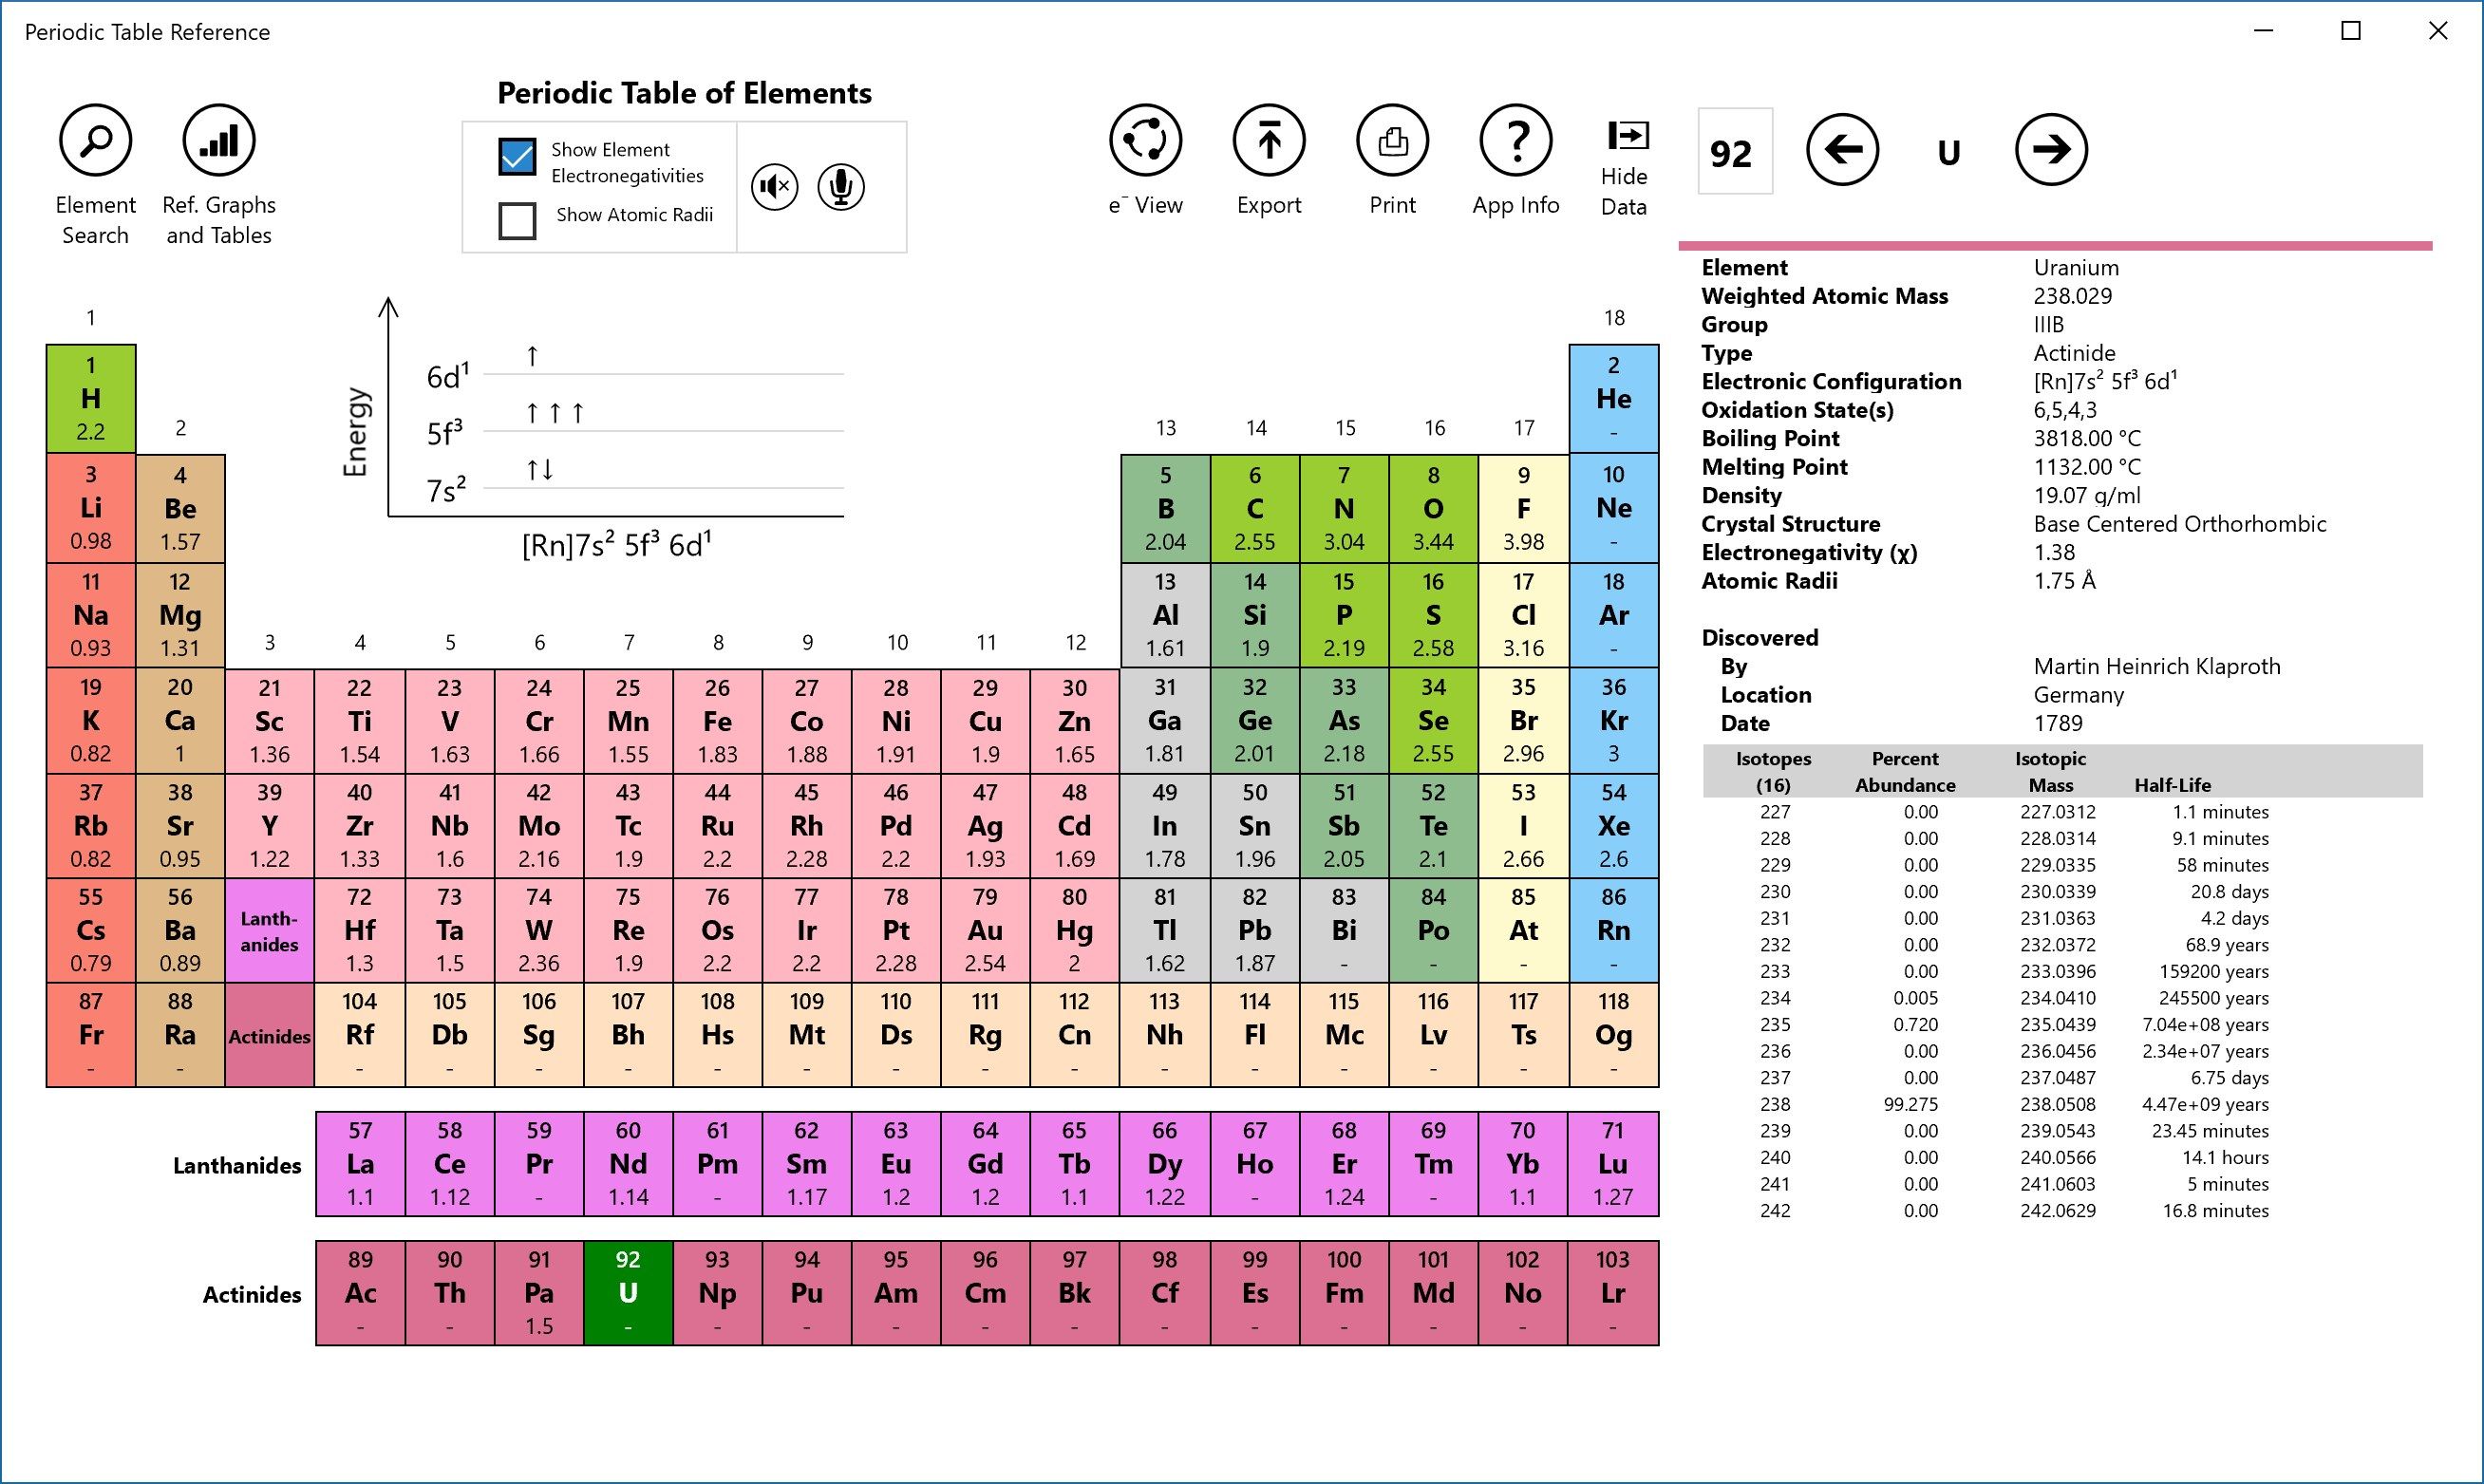 This view shows the interactive Periodic Table of Elements. Elements are selected by tapping on them and/or using the keyboard arrow keys. As an element is selected the Data View to the right is updated as is the Energy Level graph. Buttons at the top provide for an Alphabetic Search, displaying Reference Tables and a Date time line graph of element discovery. The buttons are also used to print and export the table, element lists, electronic configurations and selected element data. The option to show Electronegativities is checked which shows Electronegativities within each cell.